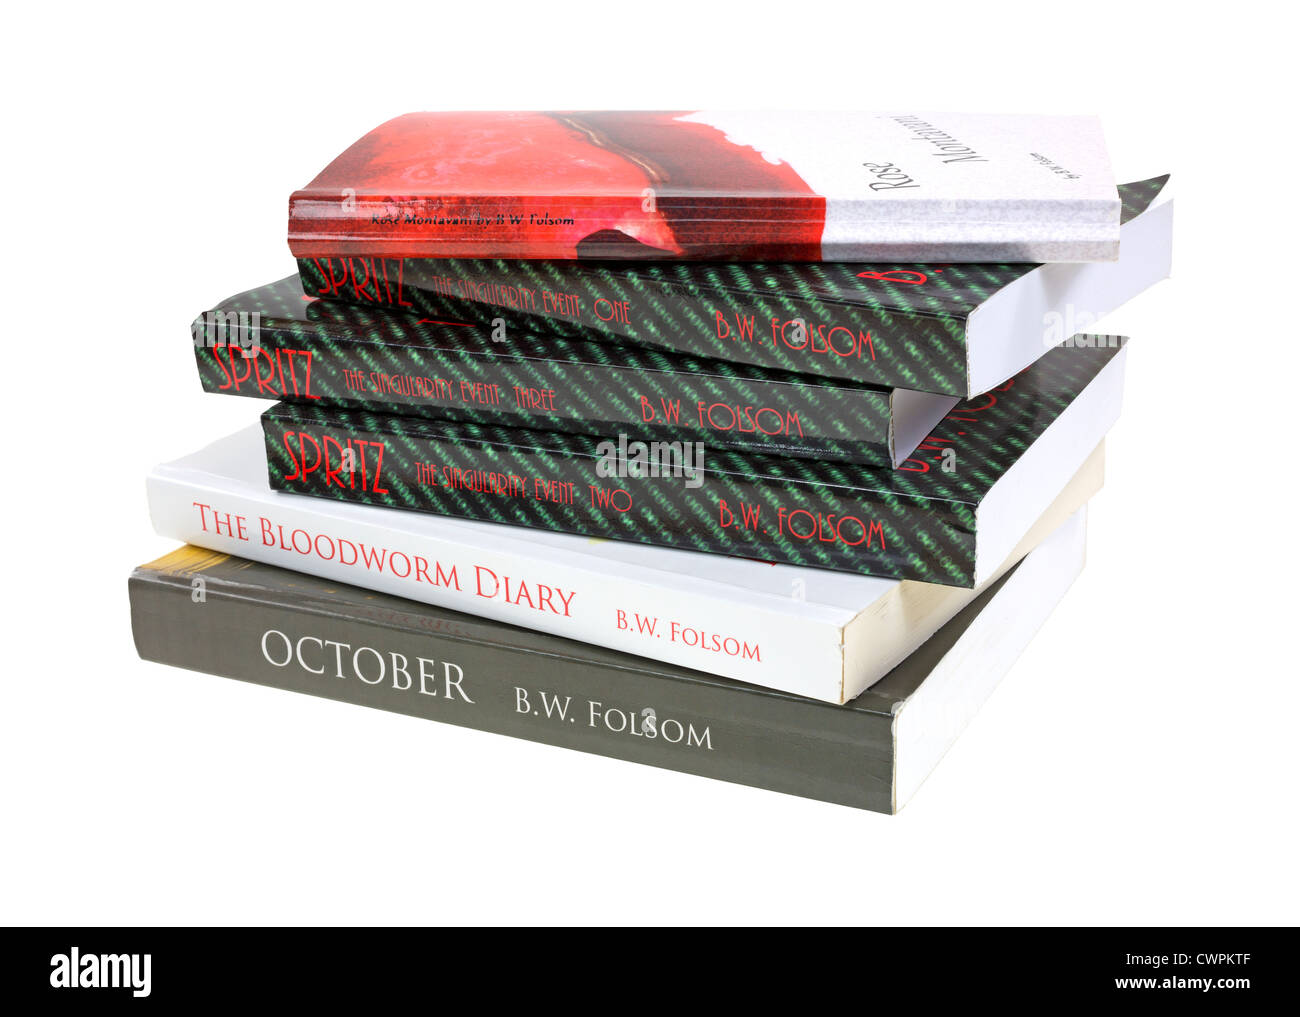 Several soft cover books sloppily stacked on a white background. Stock Photo